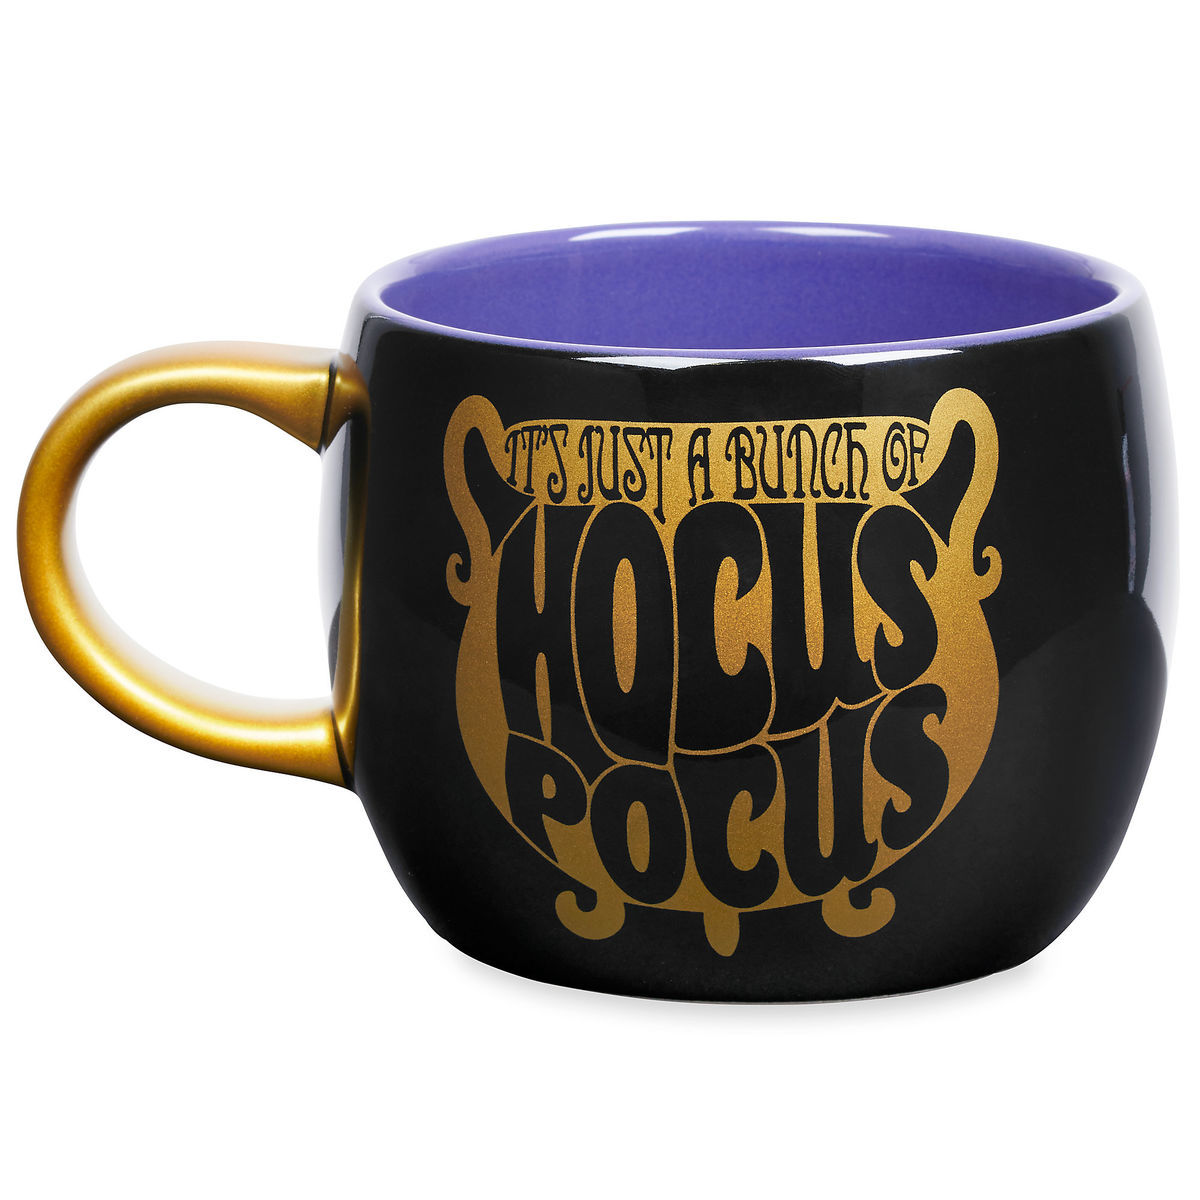 Hocus Pocus Merch is Now at The Disney Store in Time for Halloween!